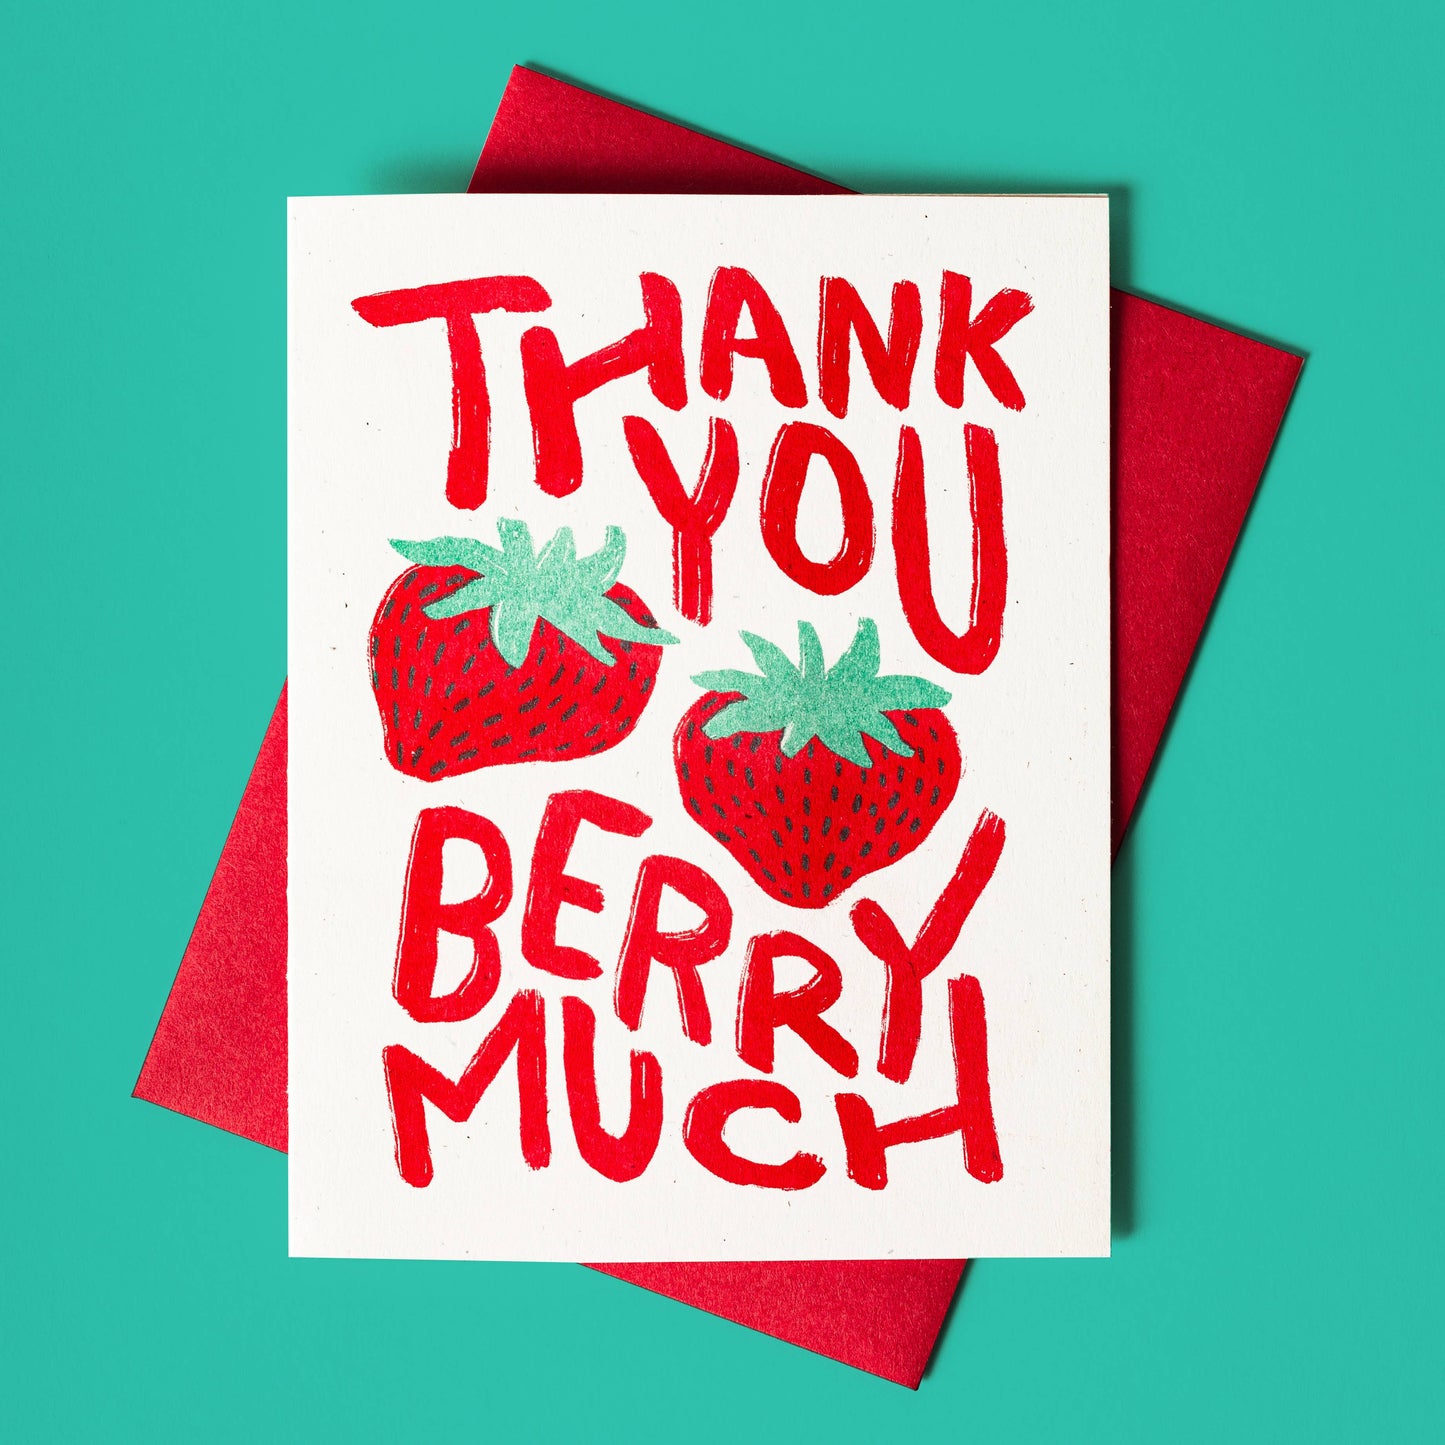 thank you greeting card that reads "Thank You Berry Much"